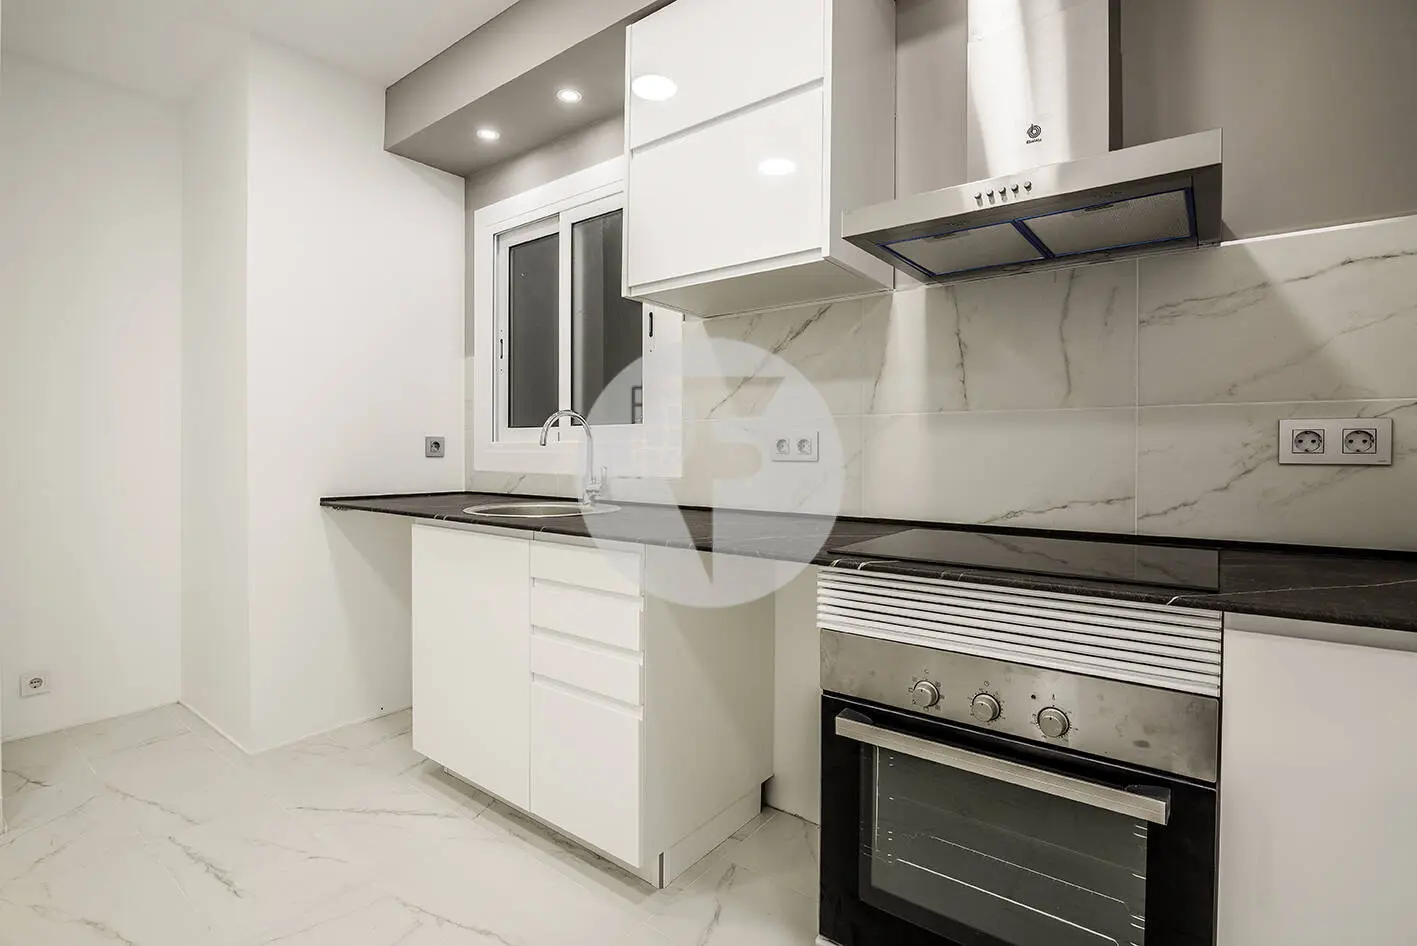 Brand new completely renovated apartment on Aragó street in the heart of El Clot in Barcelona. 15